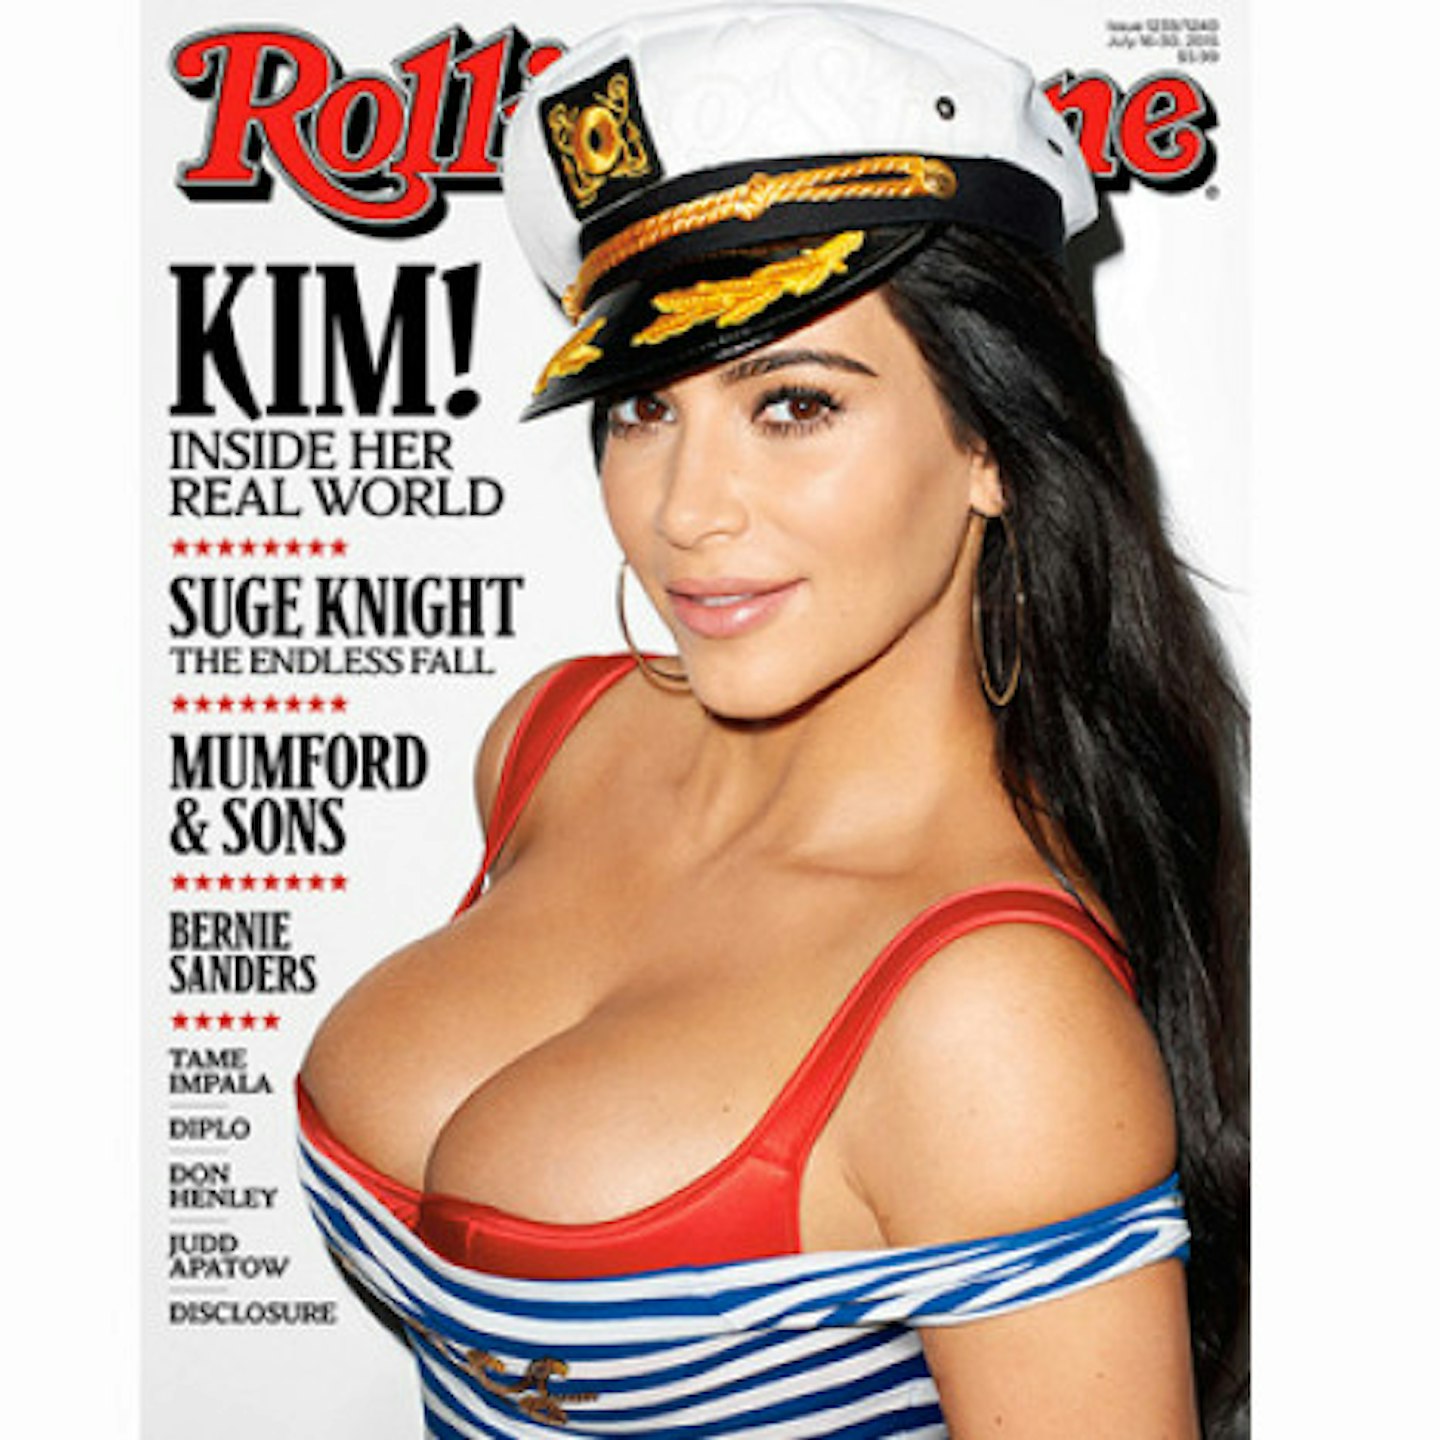 Kim made the comments to Rolling Stone